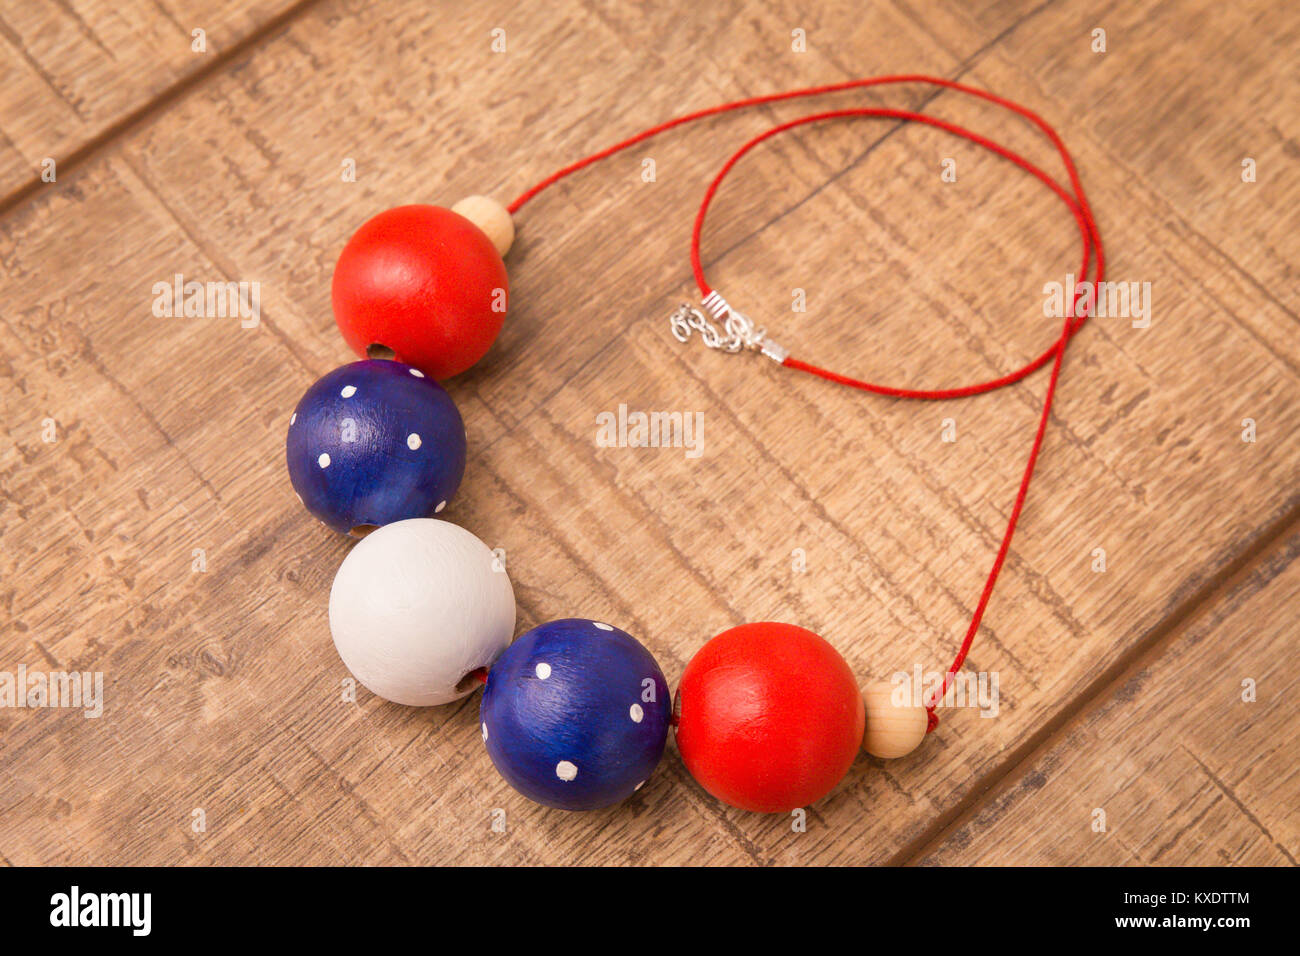 Colorful round wood beads necklace hand painted with blue, red, white and natural color beads on a wood table background Stock Photo